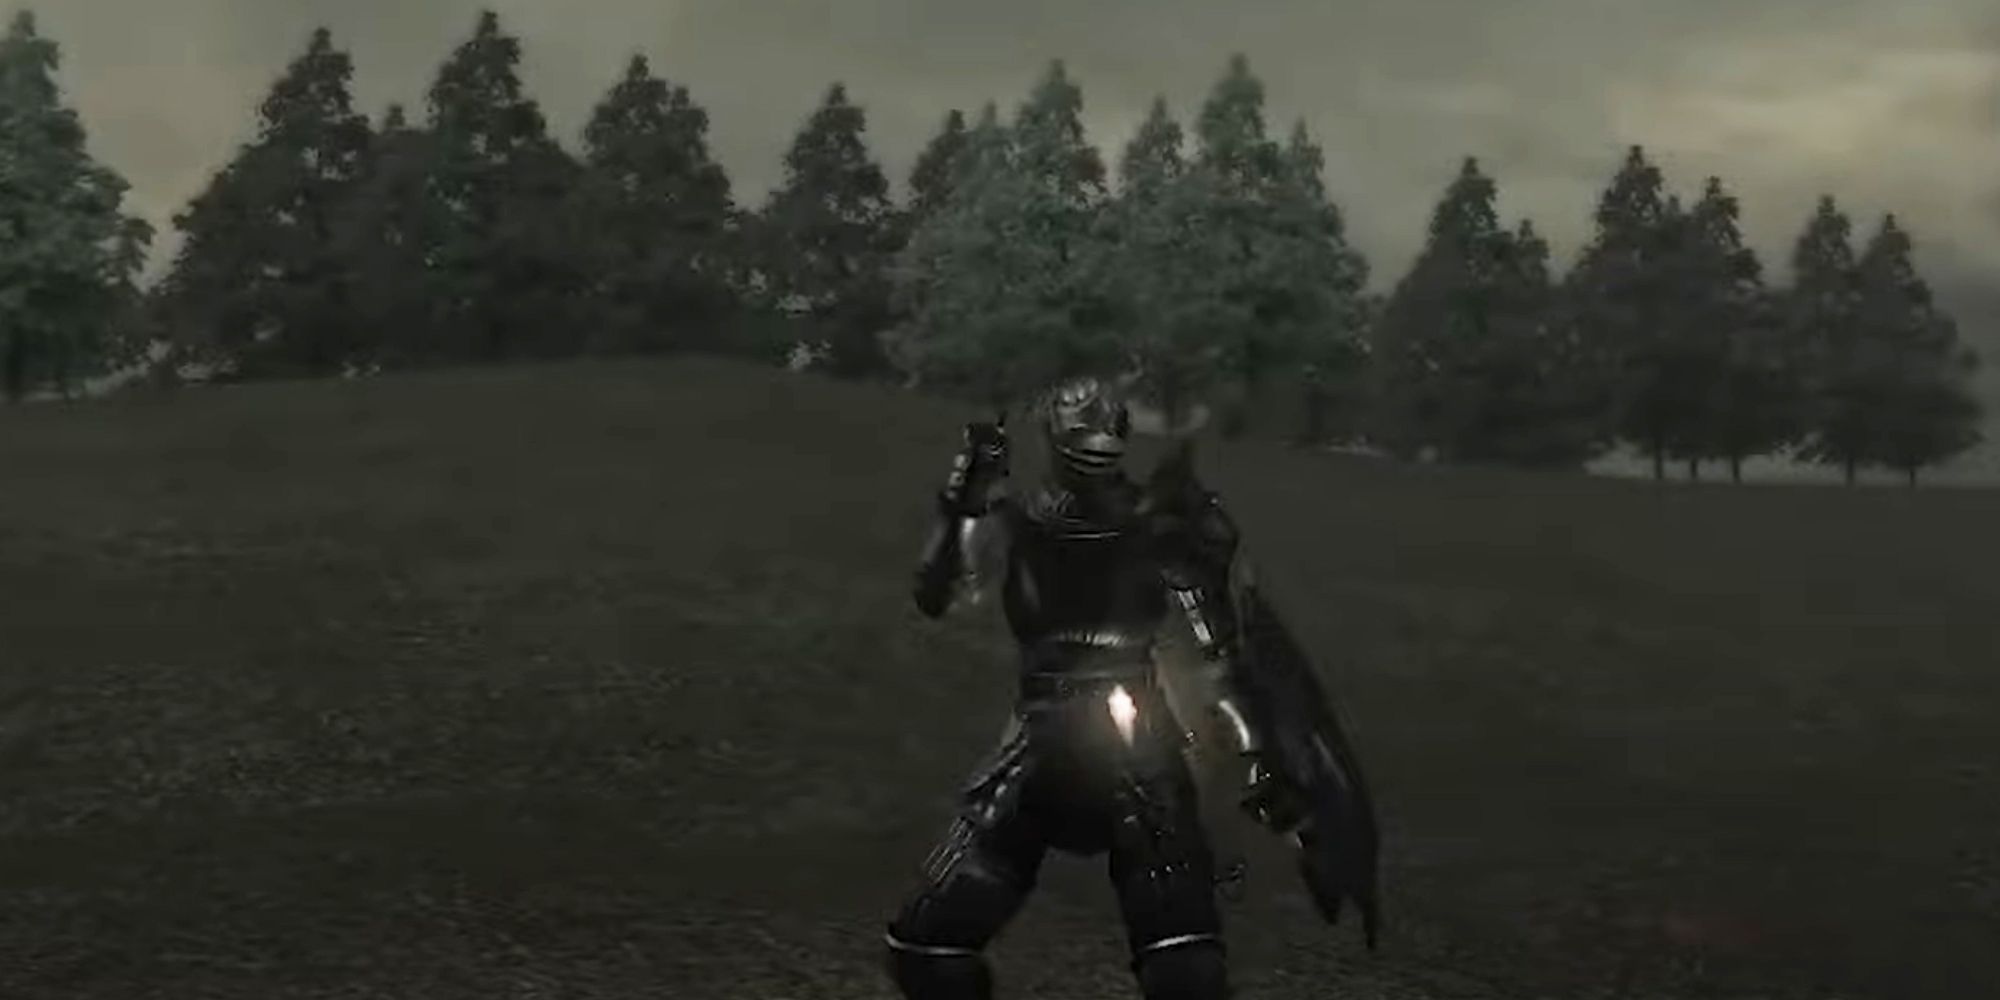 Demons Souls knight stood in an empty field in front of a forest